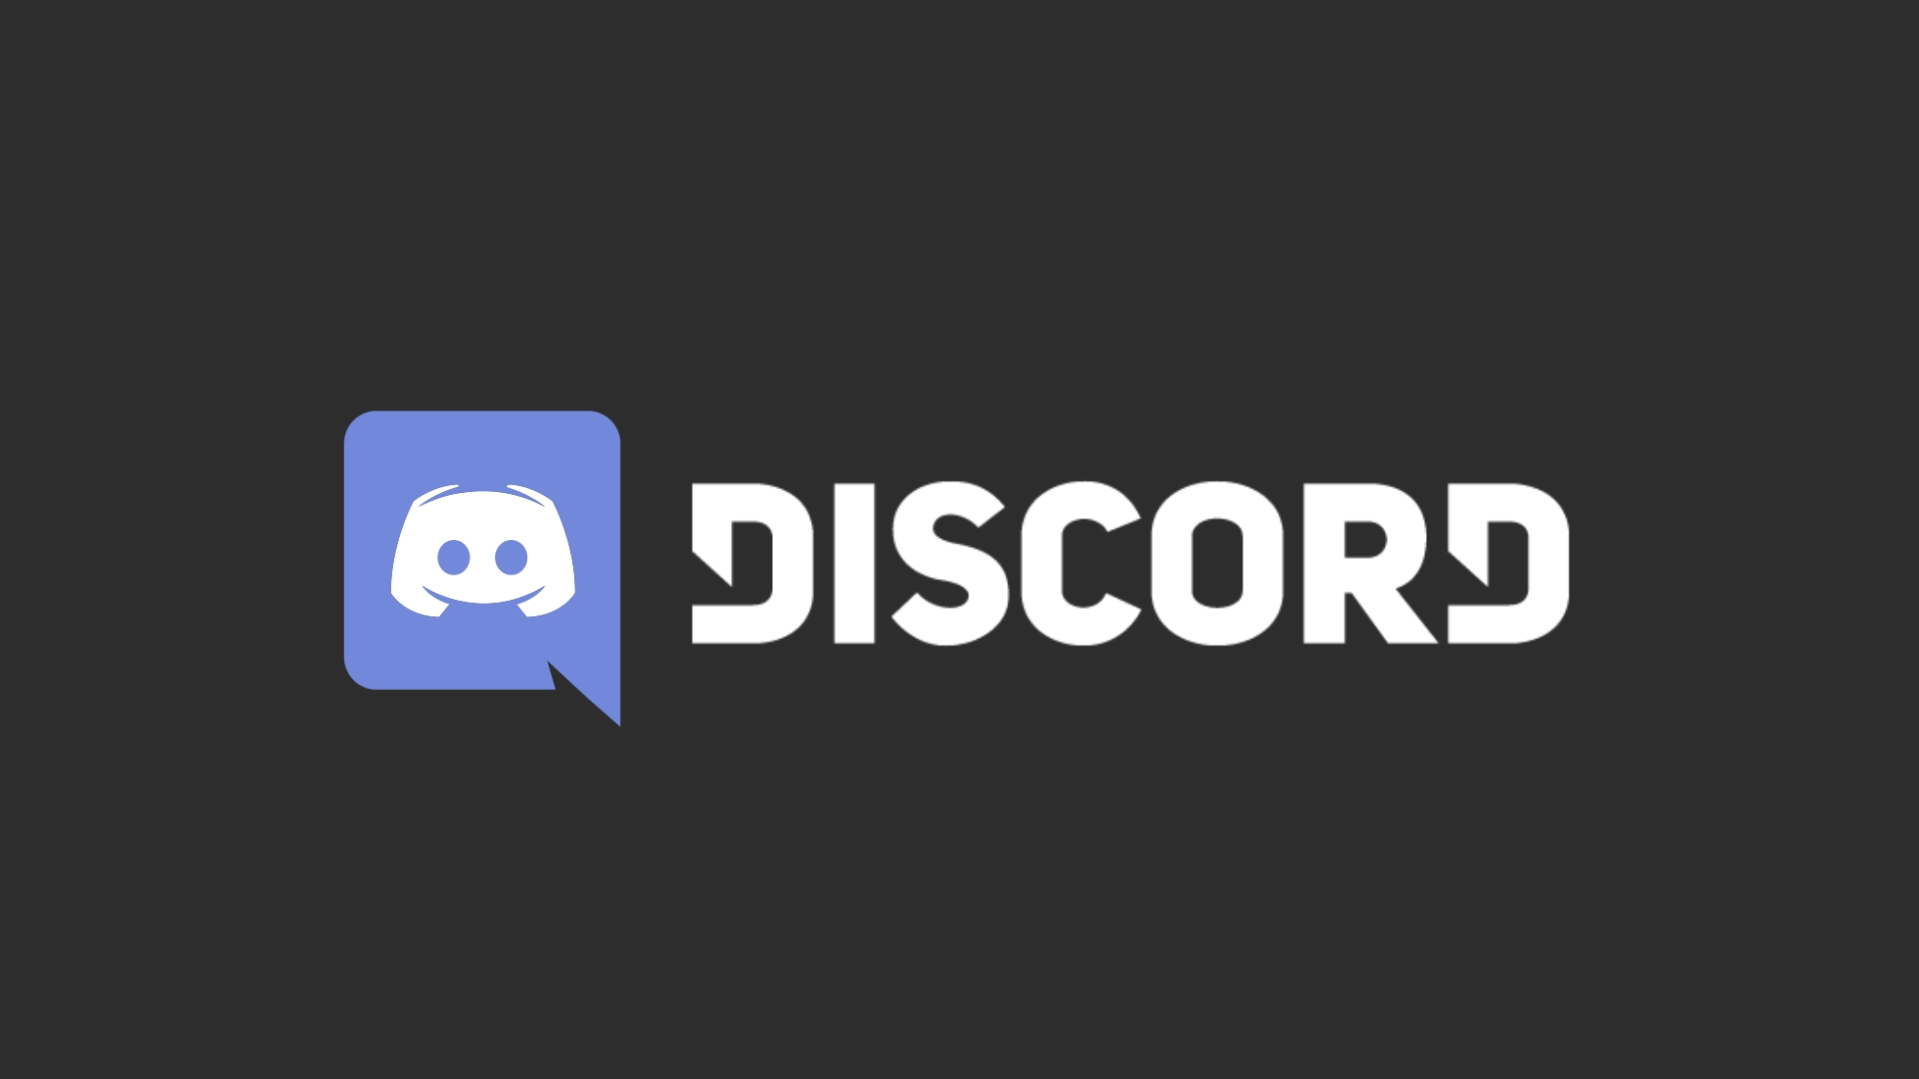 Discord: Your Gateway to Connected Communities